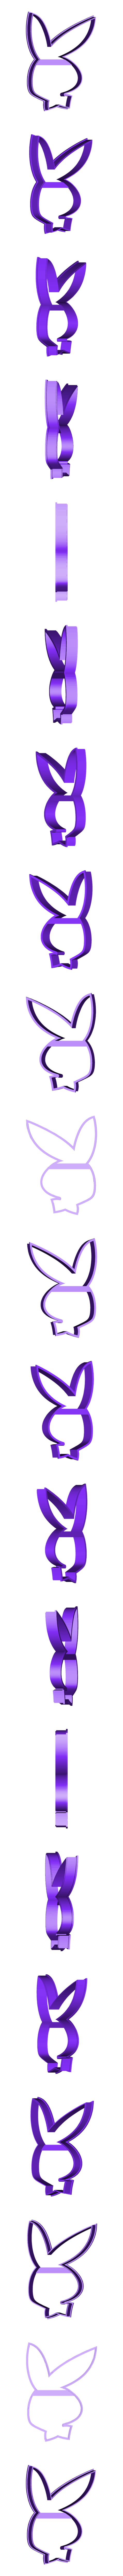 Bunny Playboy.stl Download free STL file Bunny Playboy cookie cutter for professional • 3D printable template, gleblubin